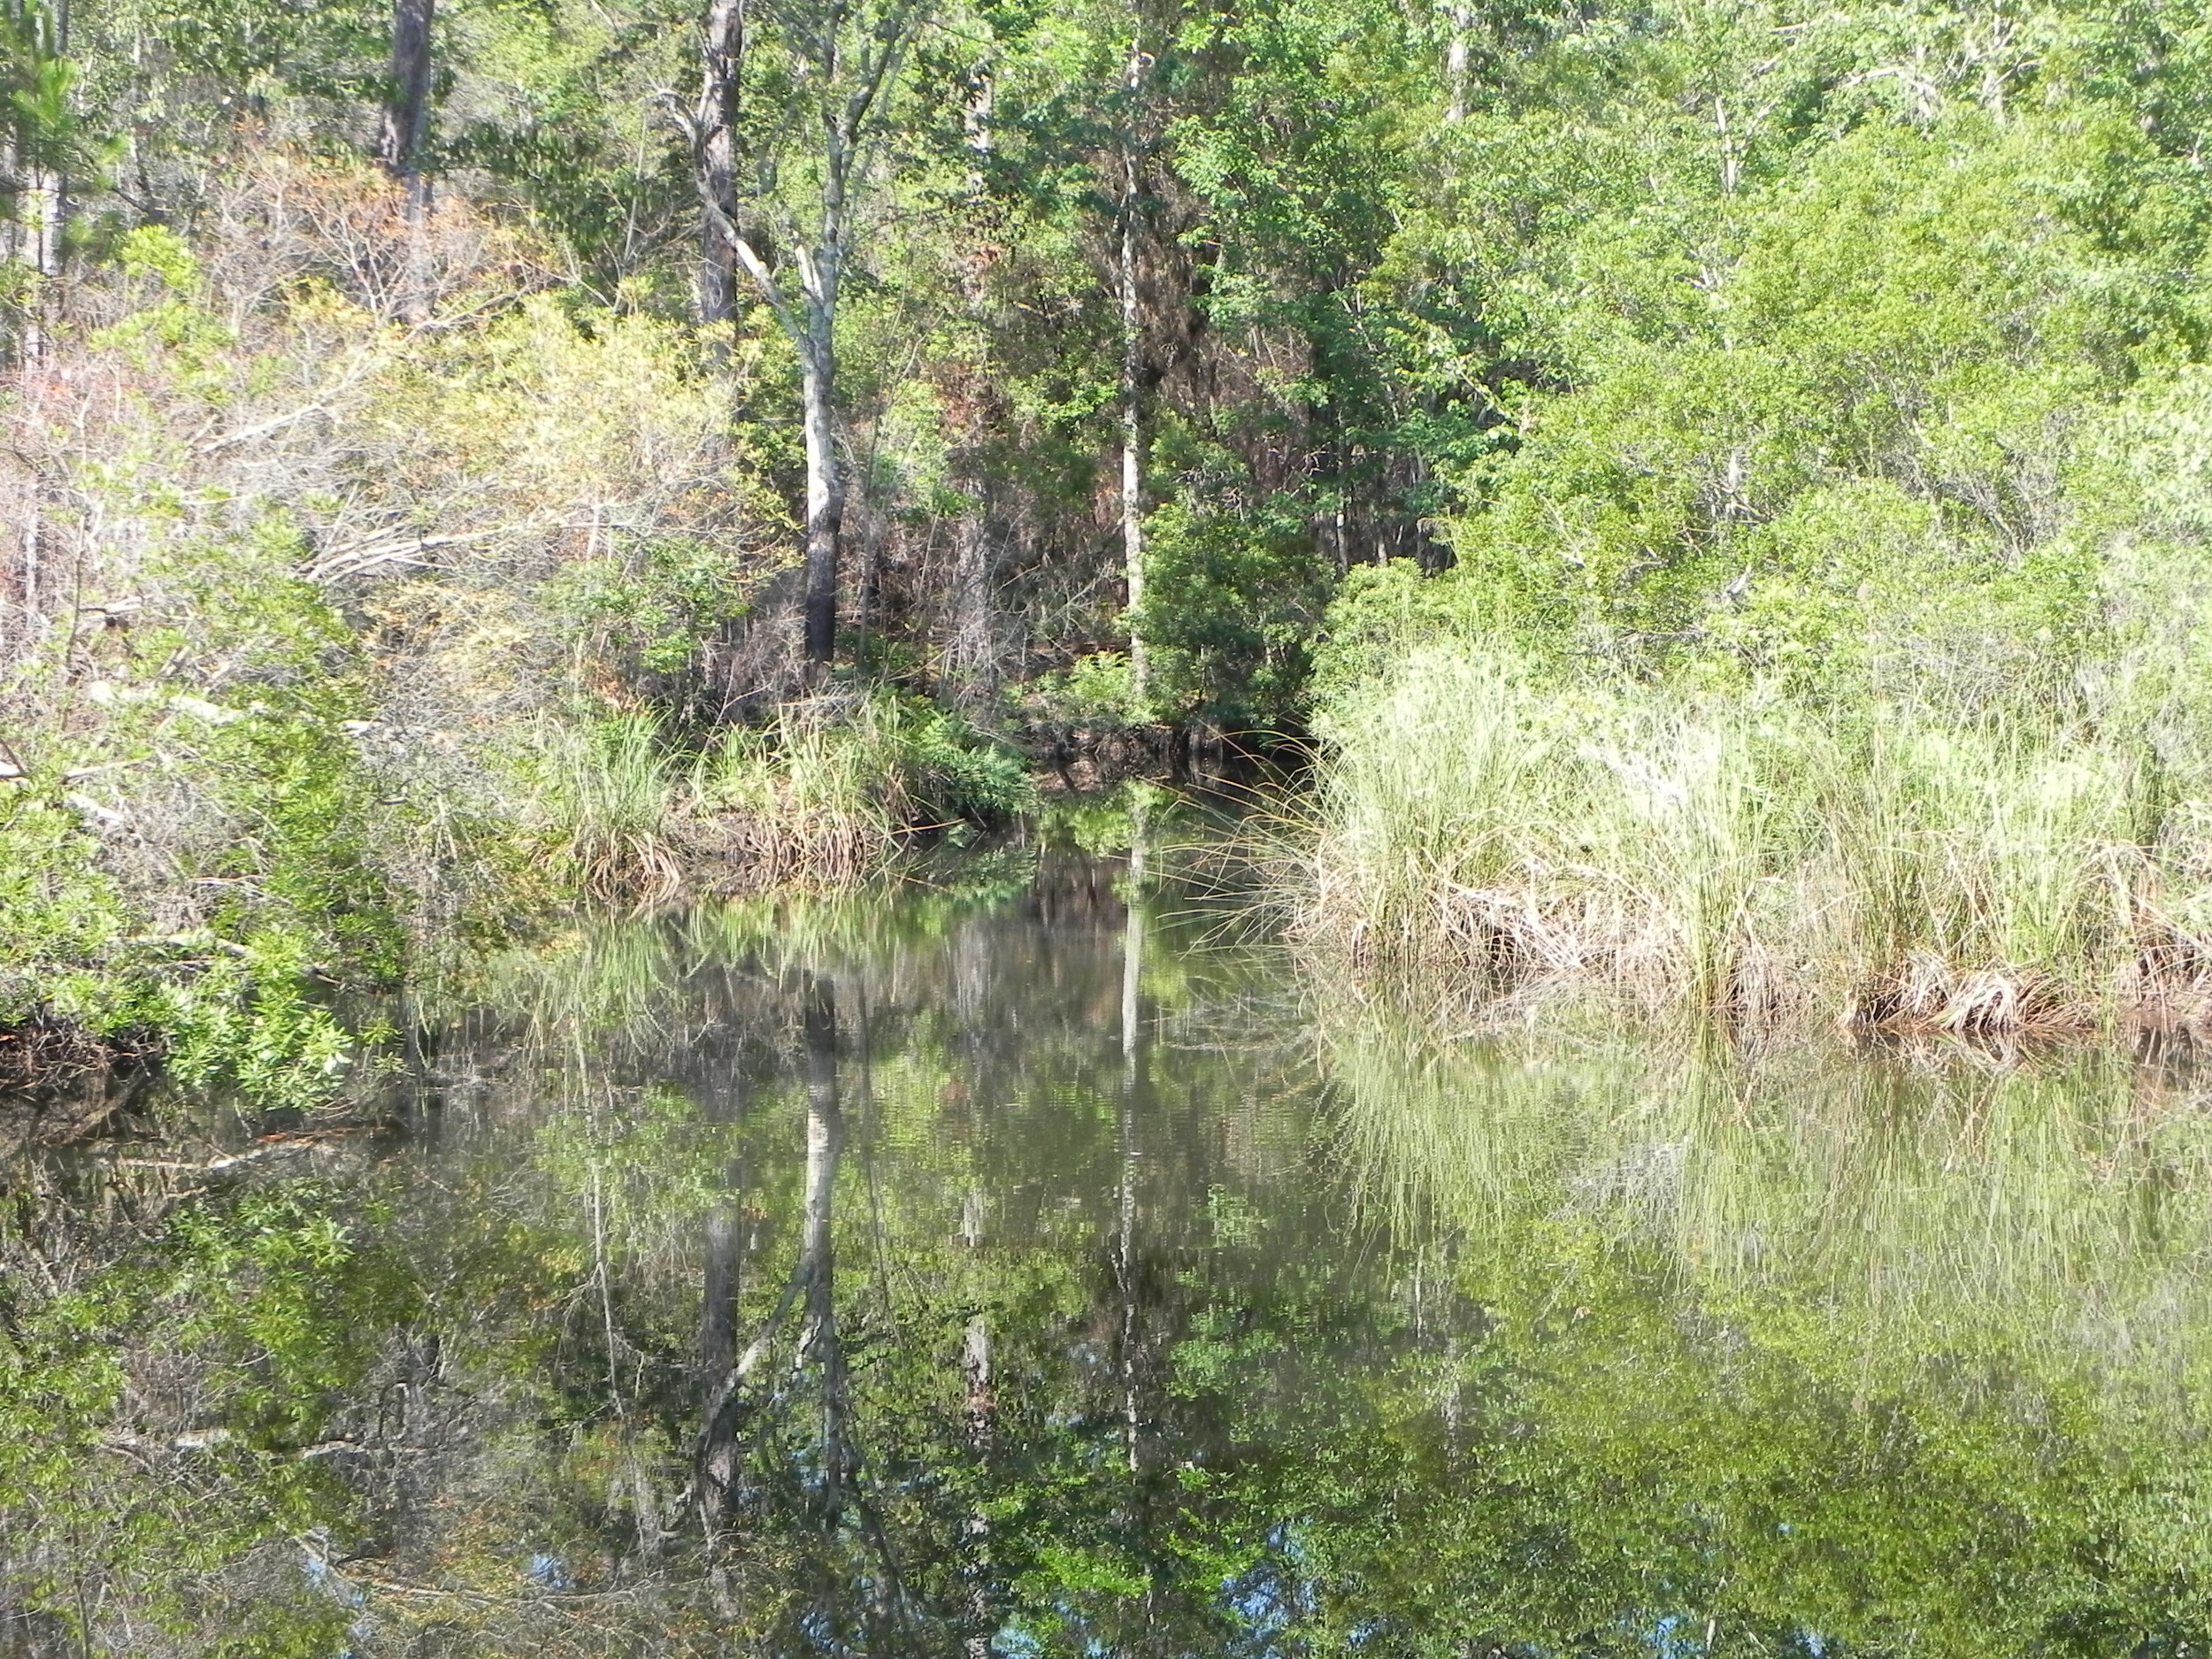 Wolf Creek, located in Graham Creek Nature Preserve, is one of many watersheds that are being monitored by the Mobile Bay National Estuary Program.